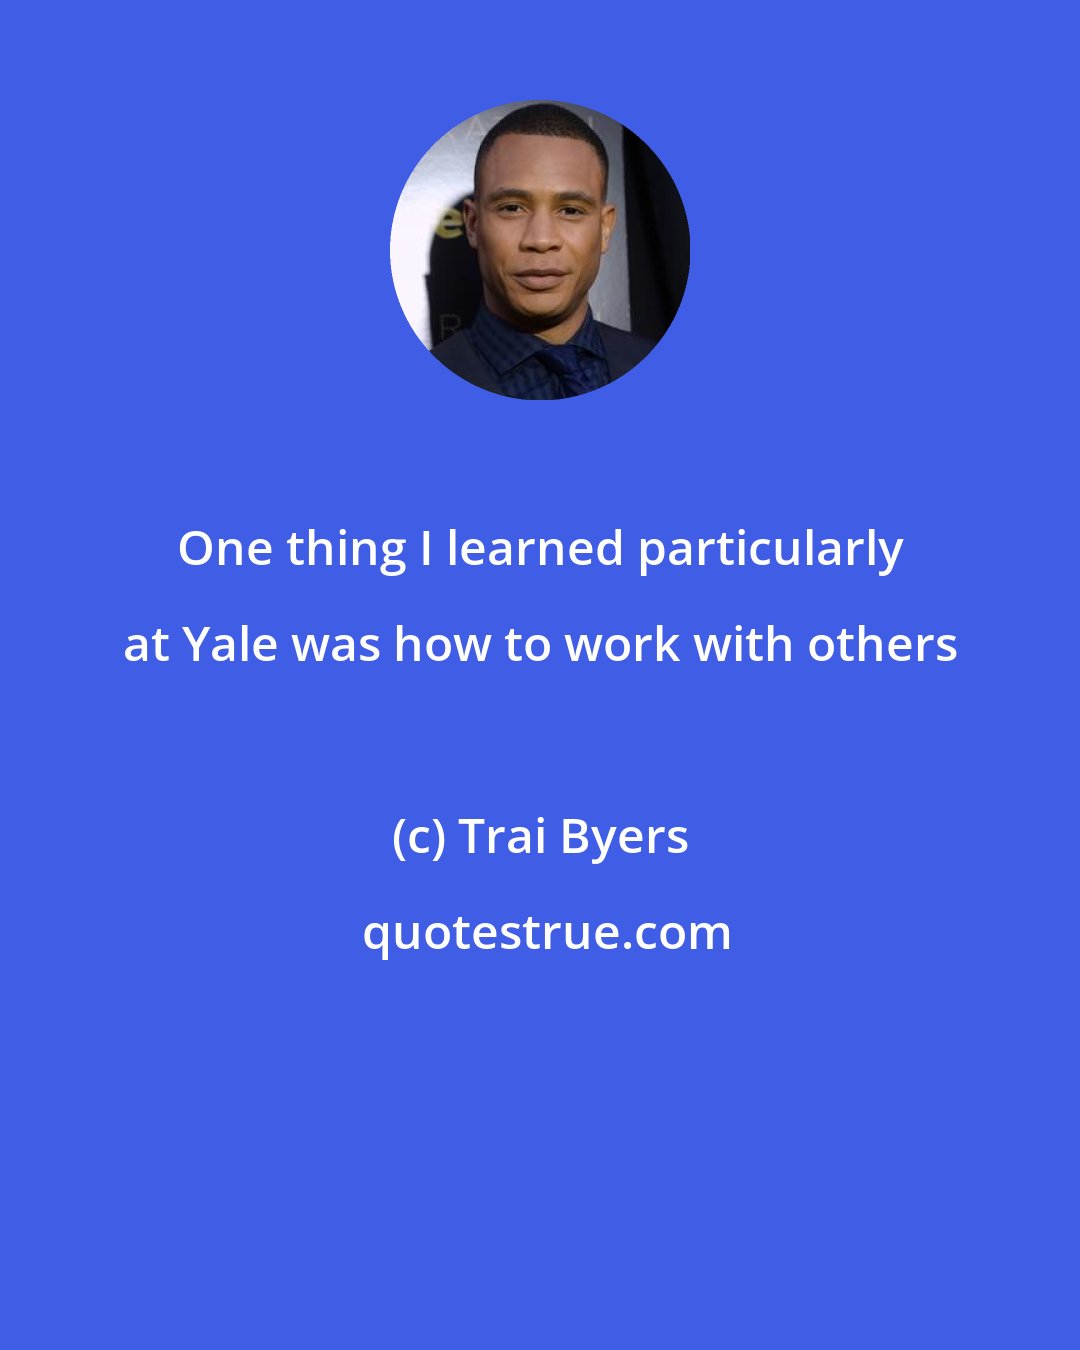 Trai Byers: One thing I learned particularly at Yale was how to work with others